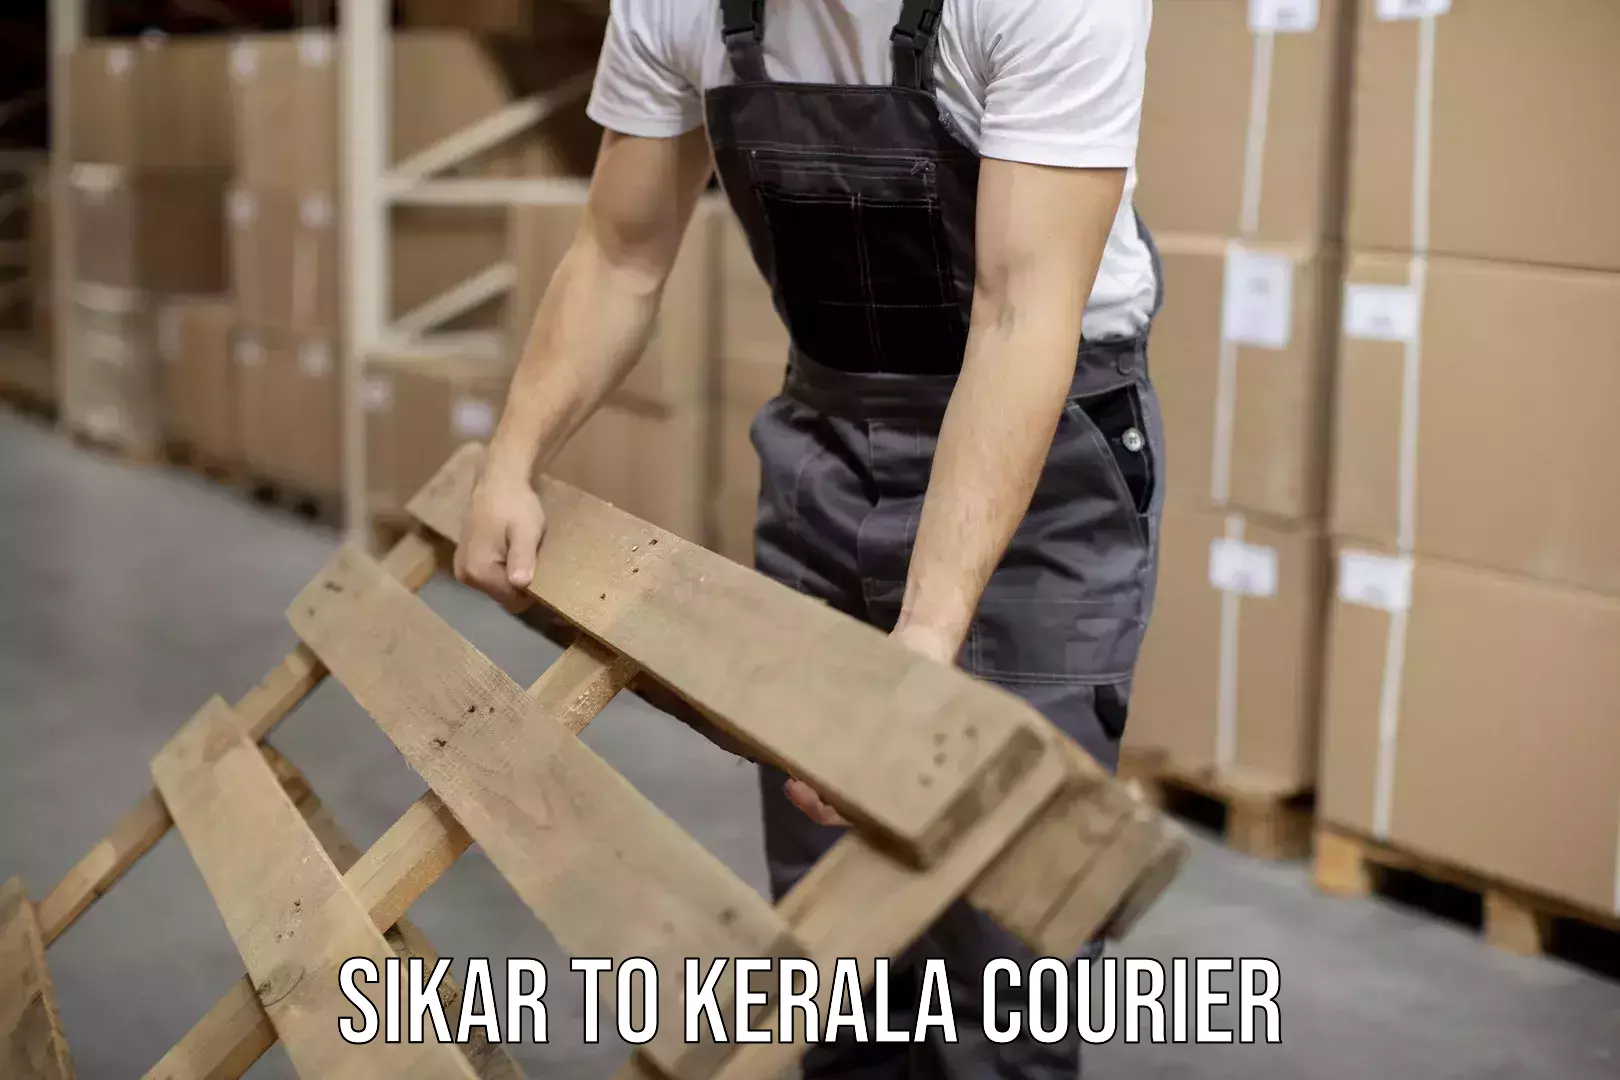 Courier app Sikar to Thamarassery